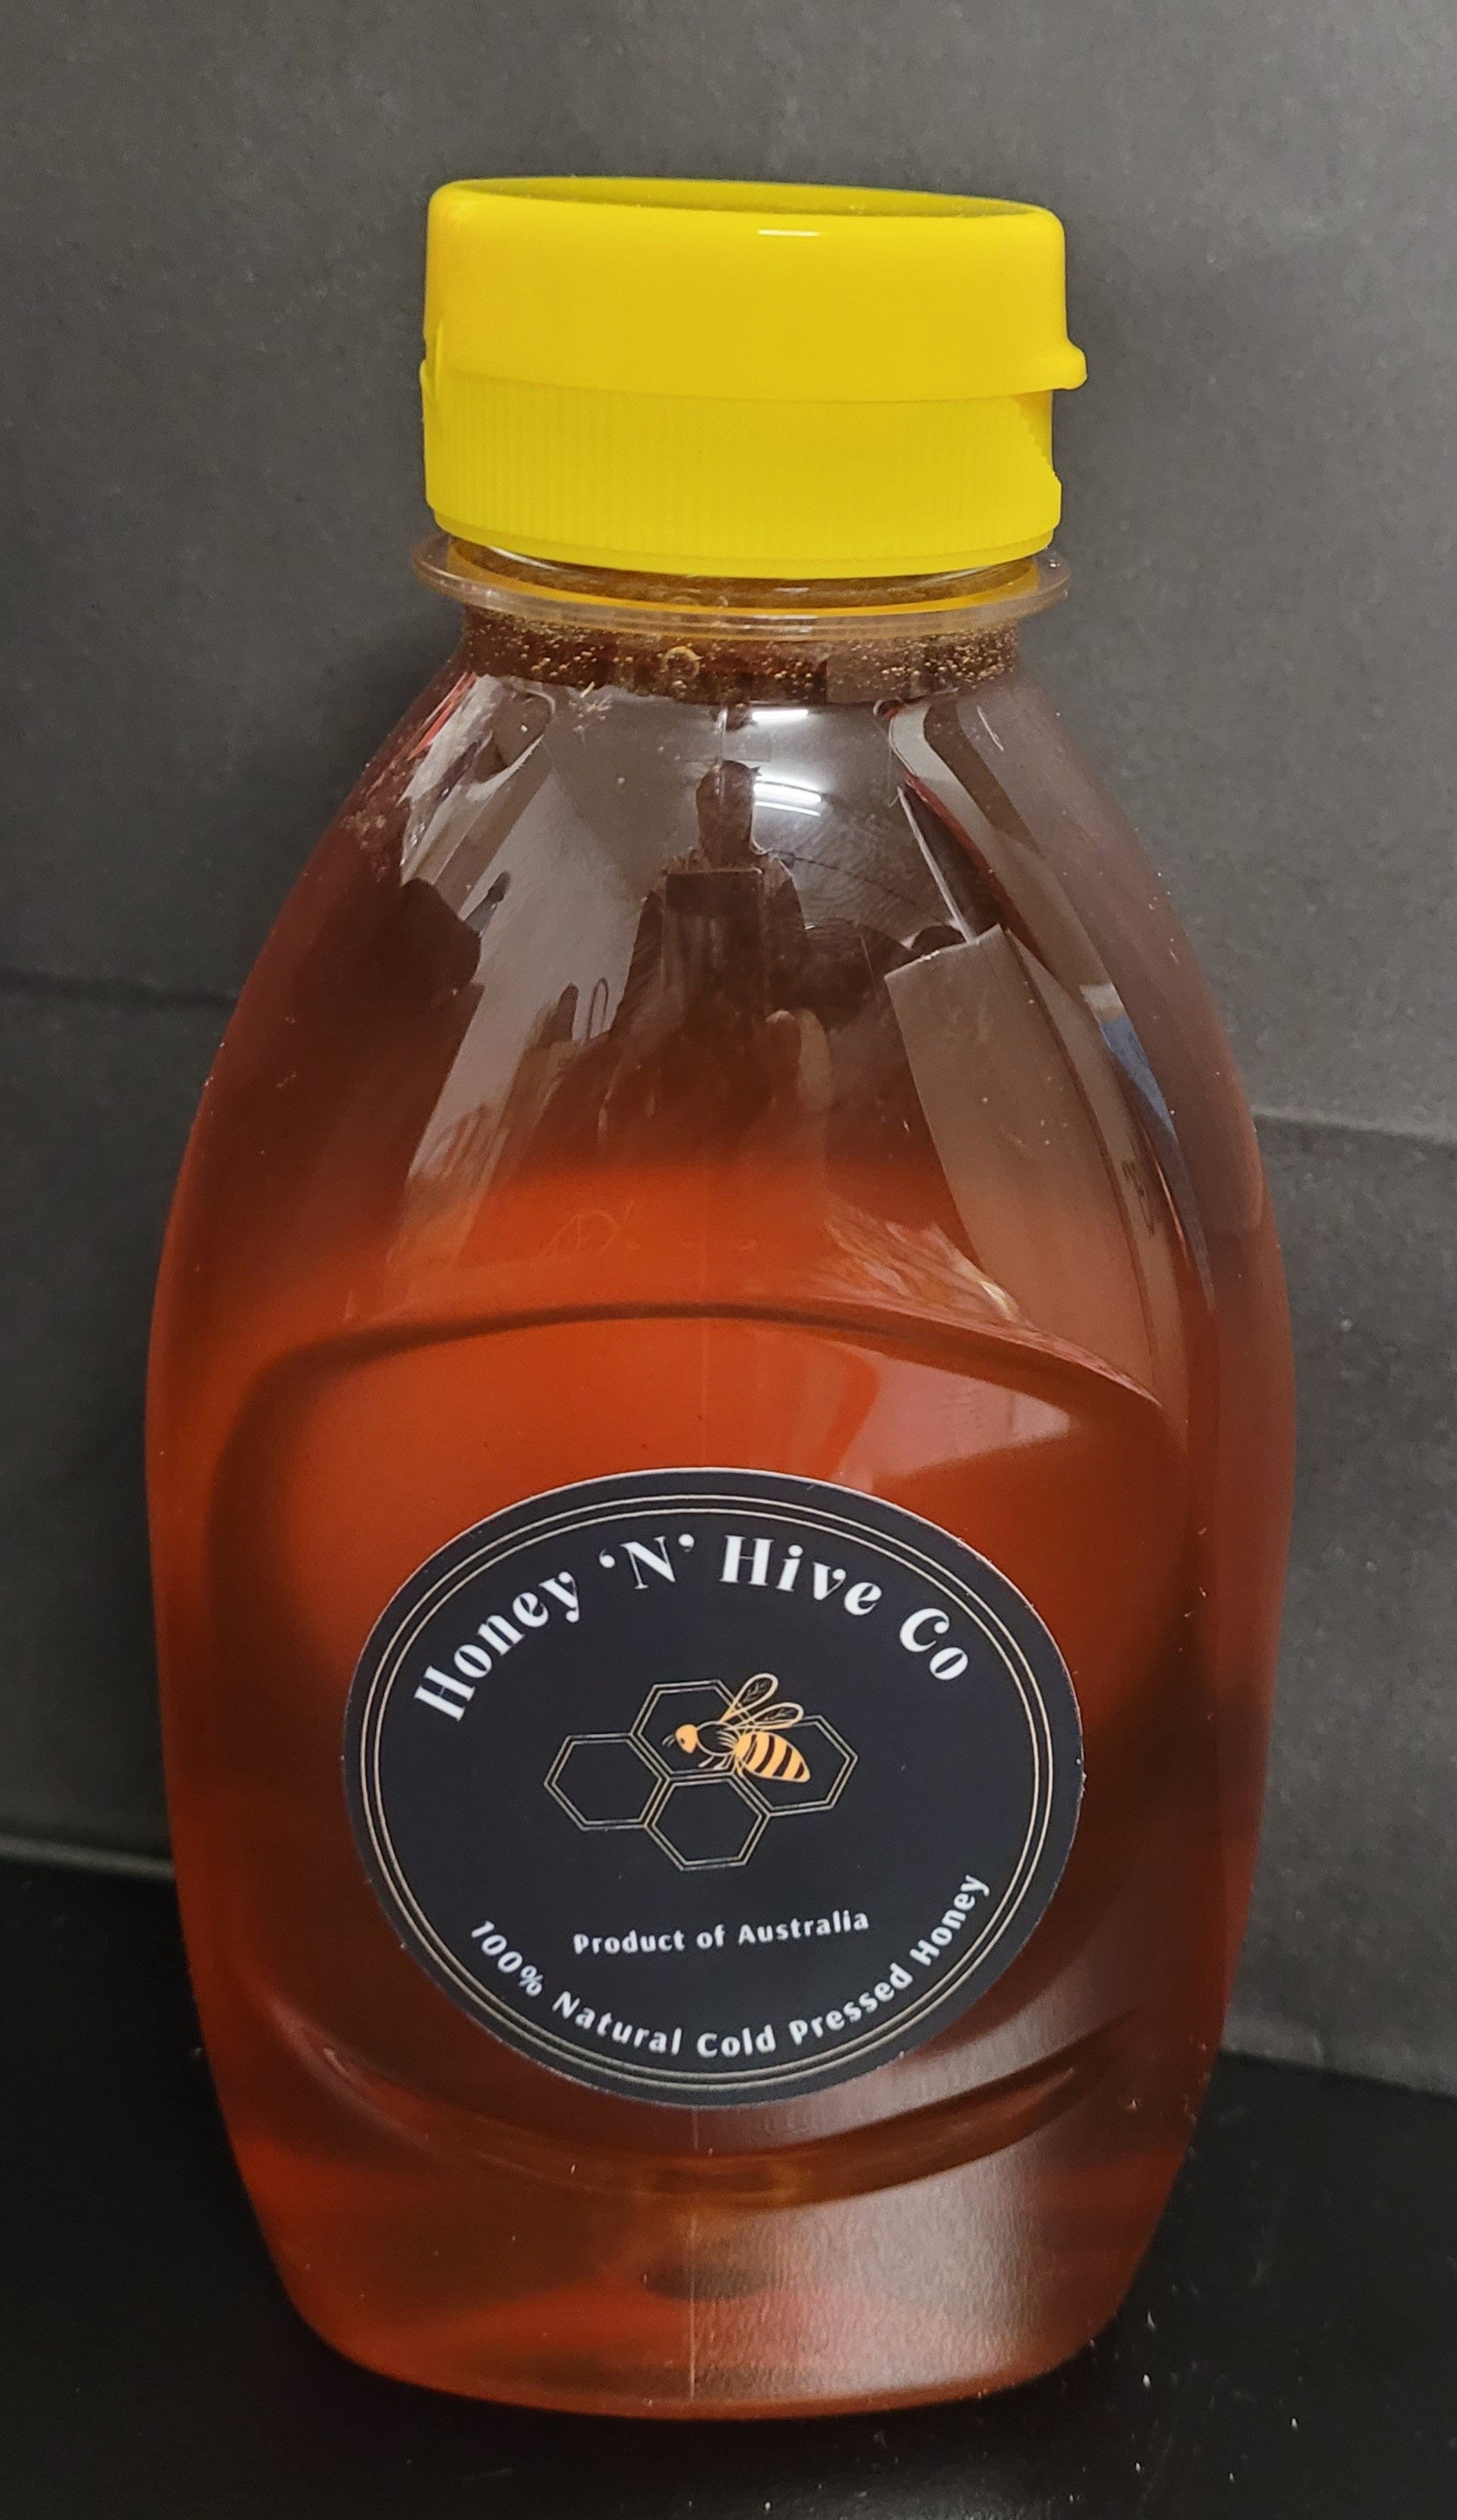 Honey 'n' Hive Co Cold Pressed Honey Squeeze bottle 500g